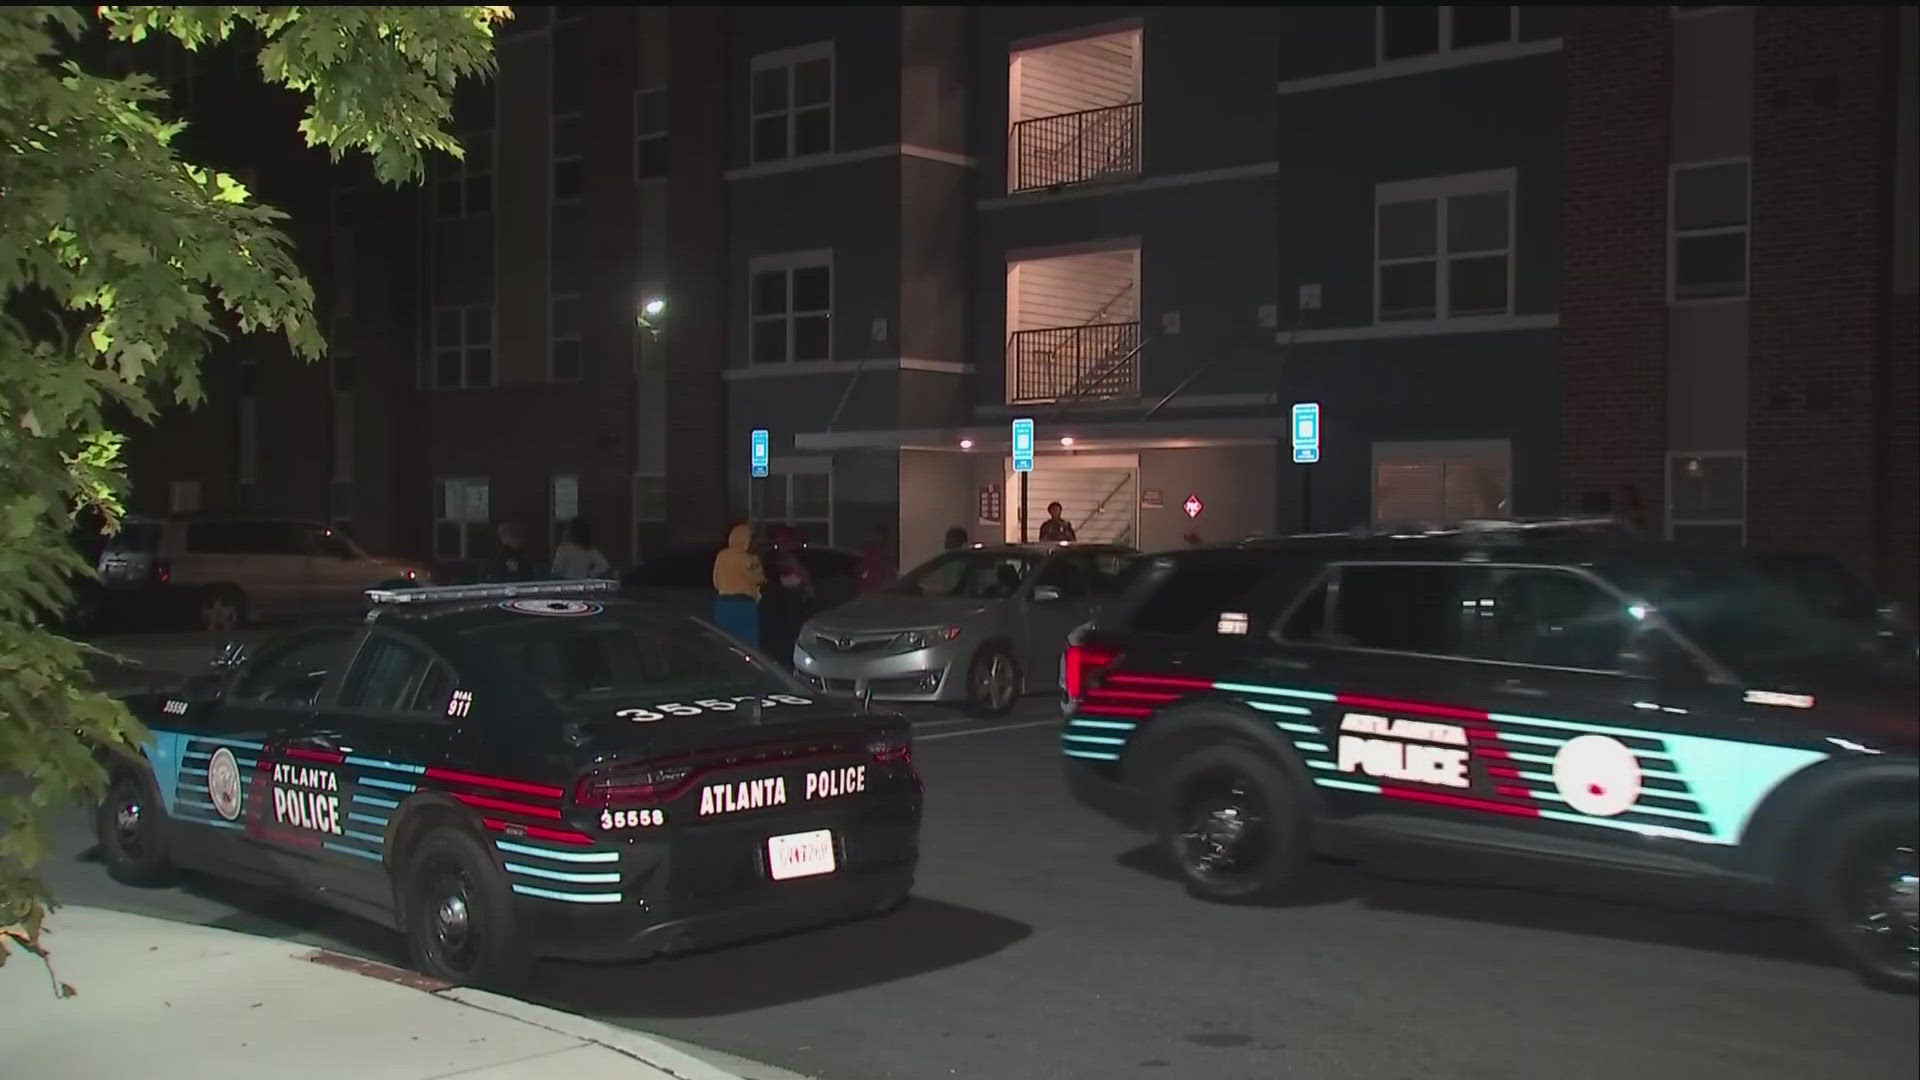 A man was found shot to death with multiple gunshot wounds at an apartment complex on Hollywood Road. This is the 2nd homicide at the complex in the past 3 weeks.